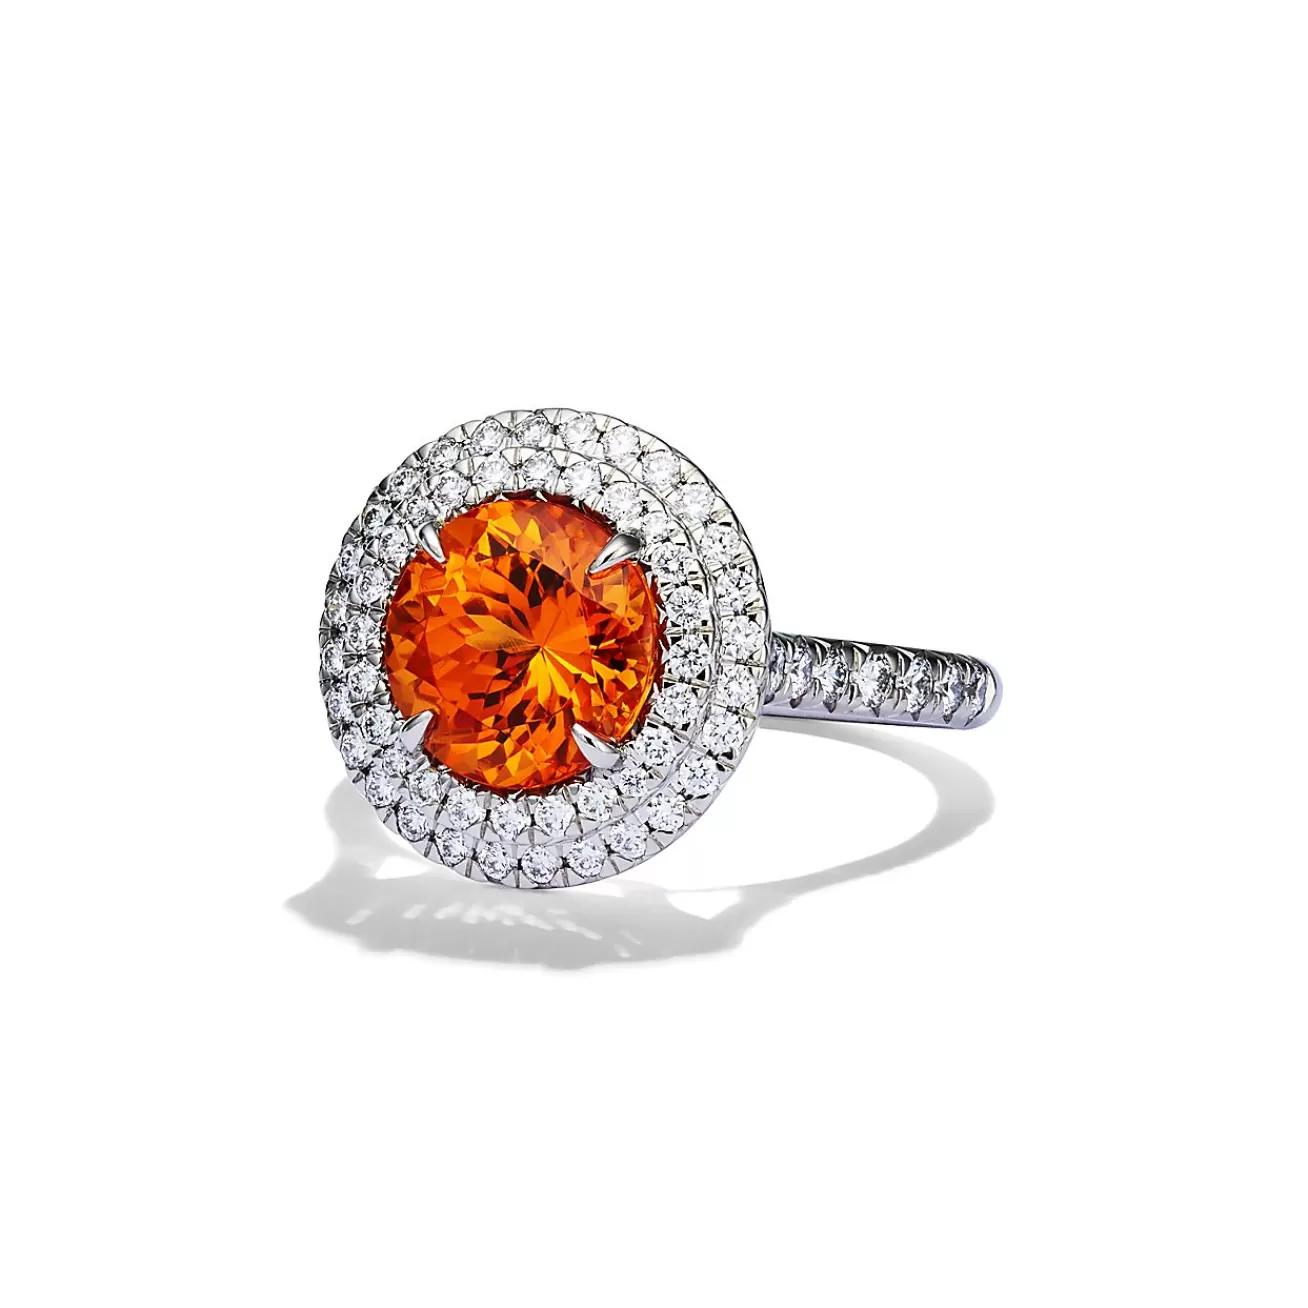 Tiffany & Co. Ring in Platinum with a Spessartine and Diamonds | ^ Rings | Diamond Jewelry